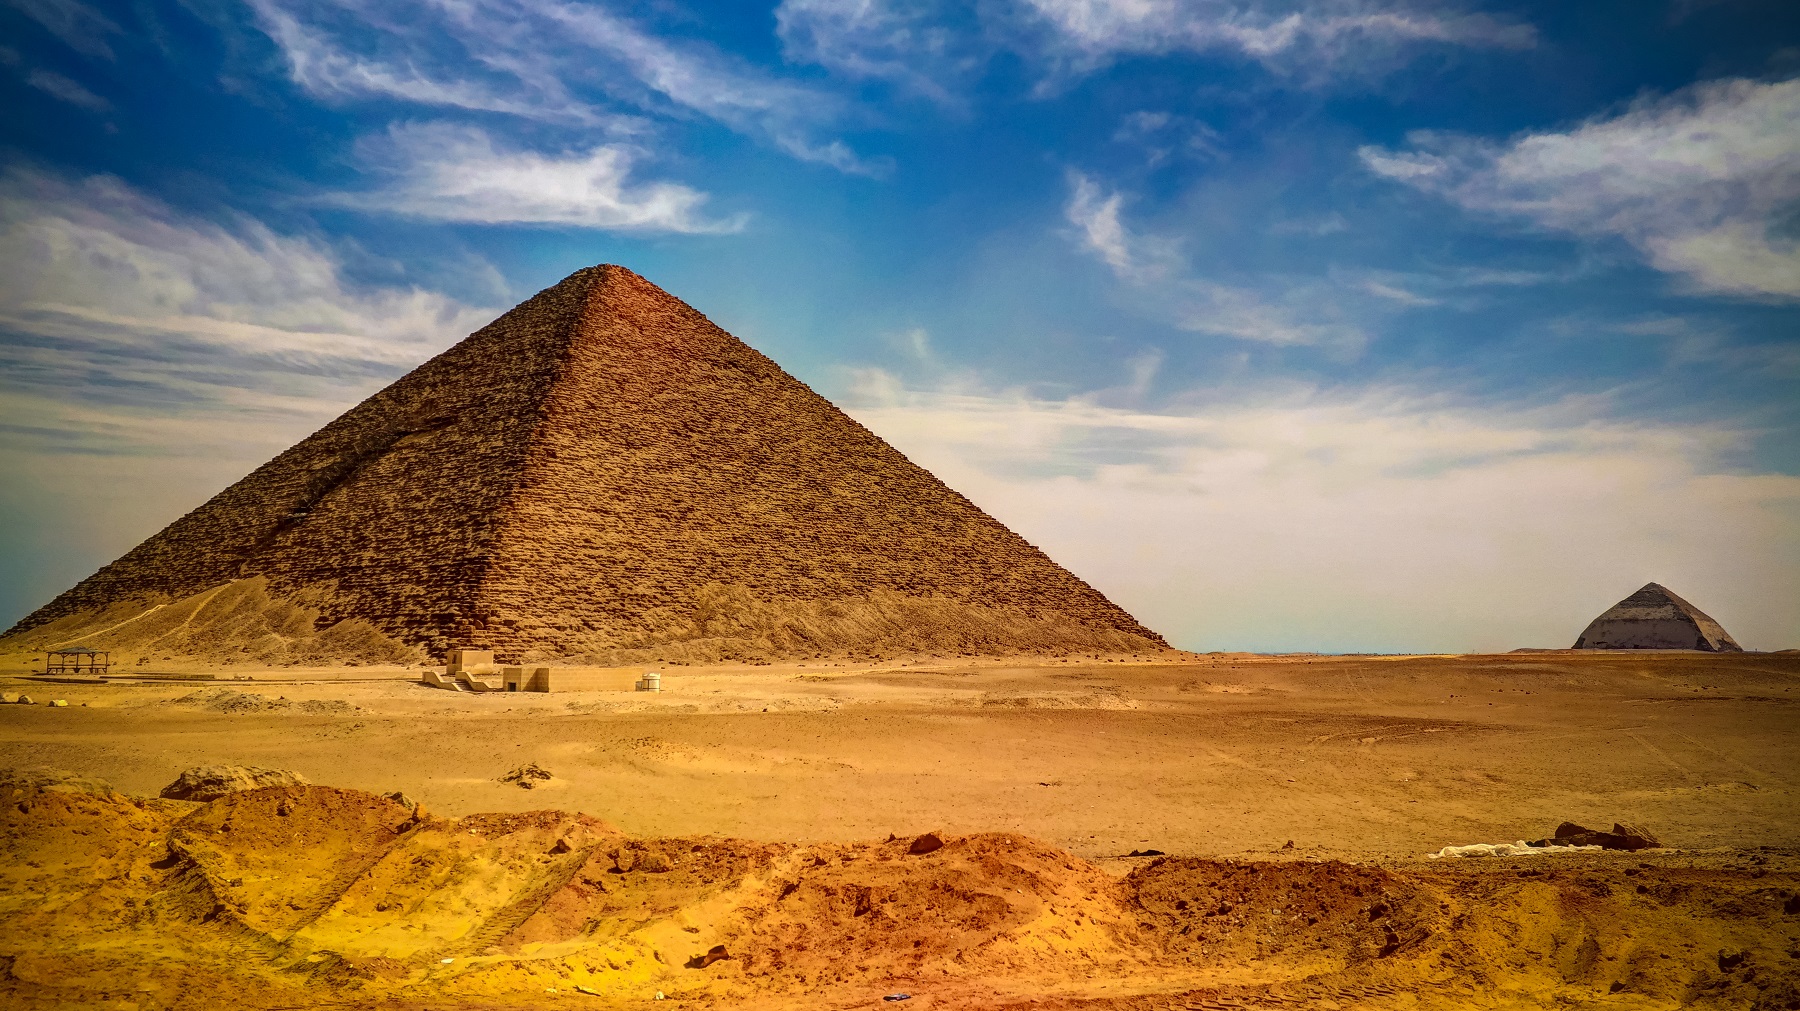 Sneferu's Red Pyramid: Ancient Egypt's Third-Largest Pyramid ...